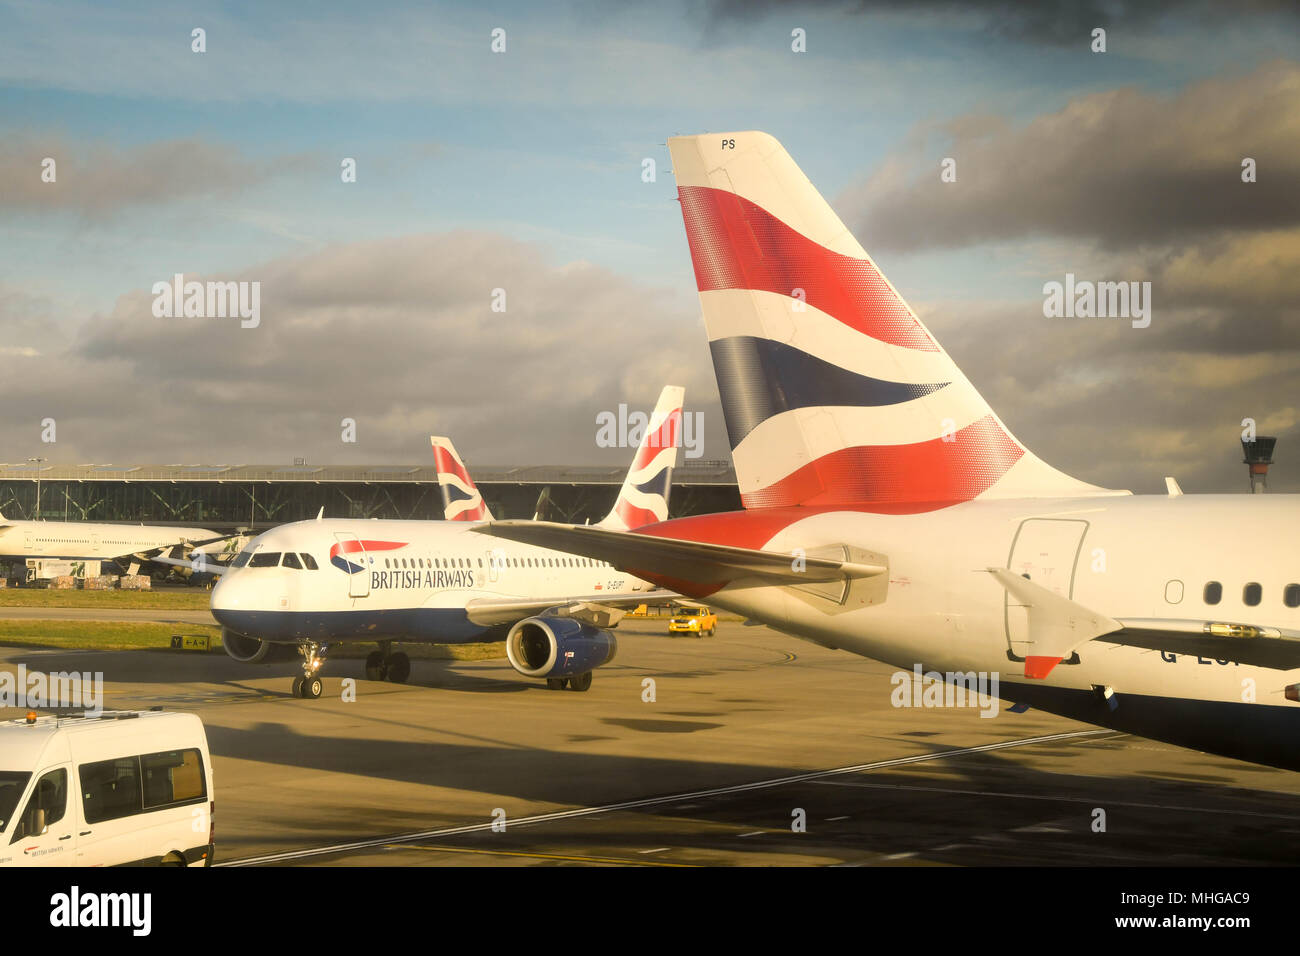 Close up of the tail of a British Airways Airbus passenger jet at London Heathrow Airport with another aircraft passing behind Stock Photo